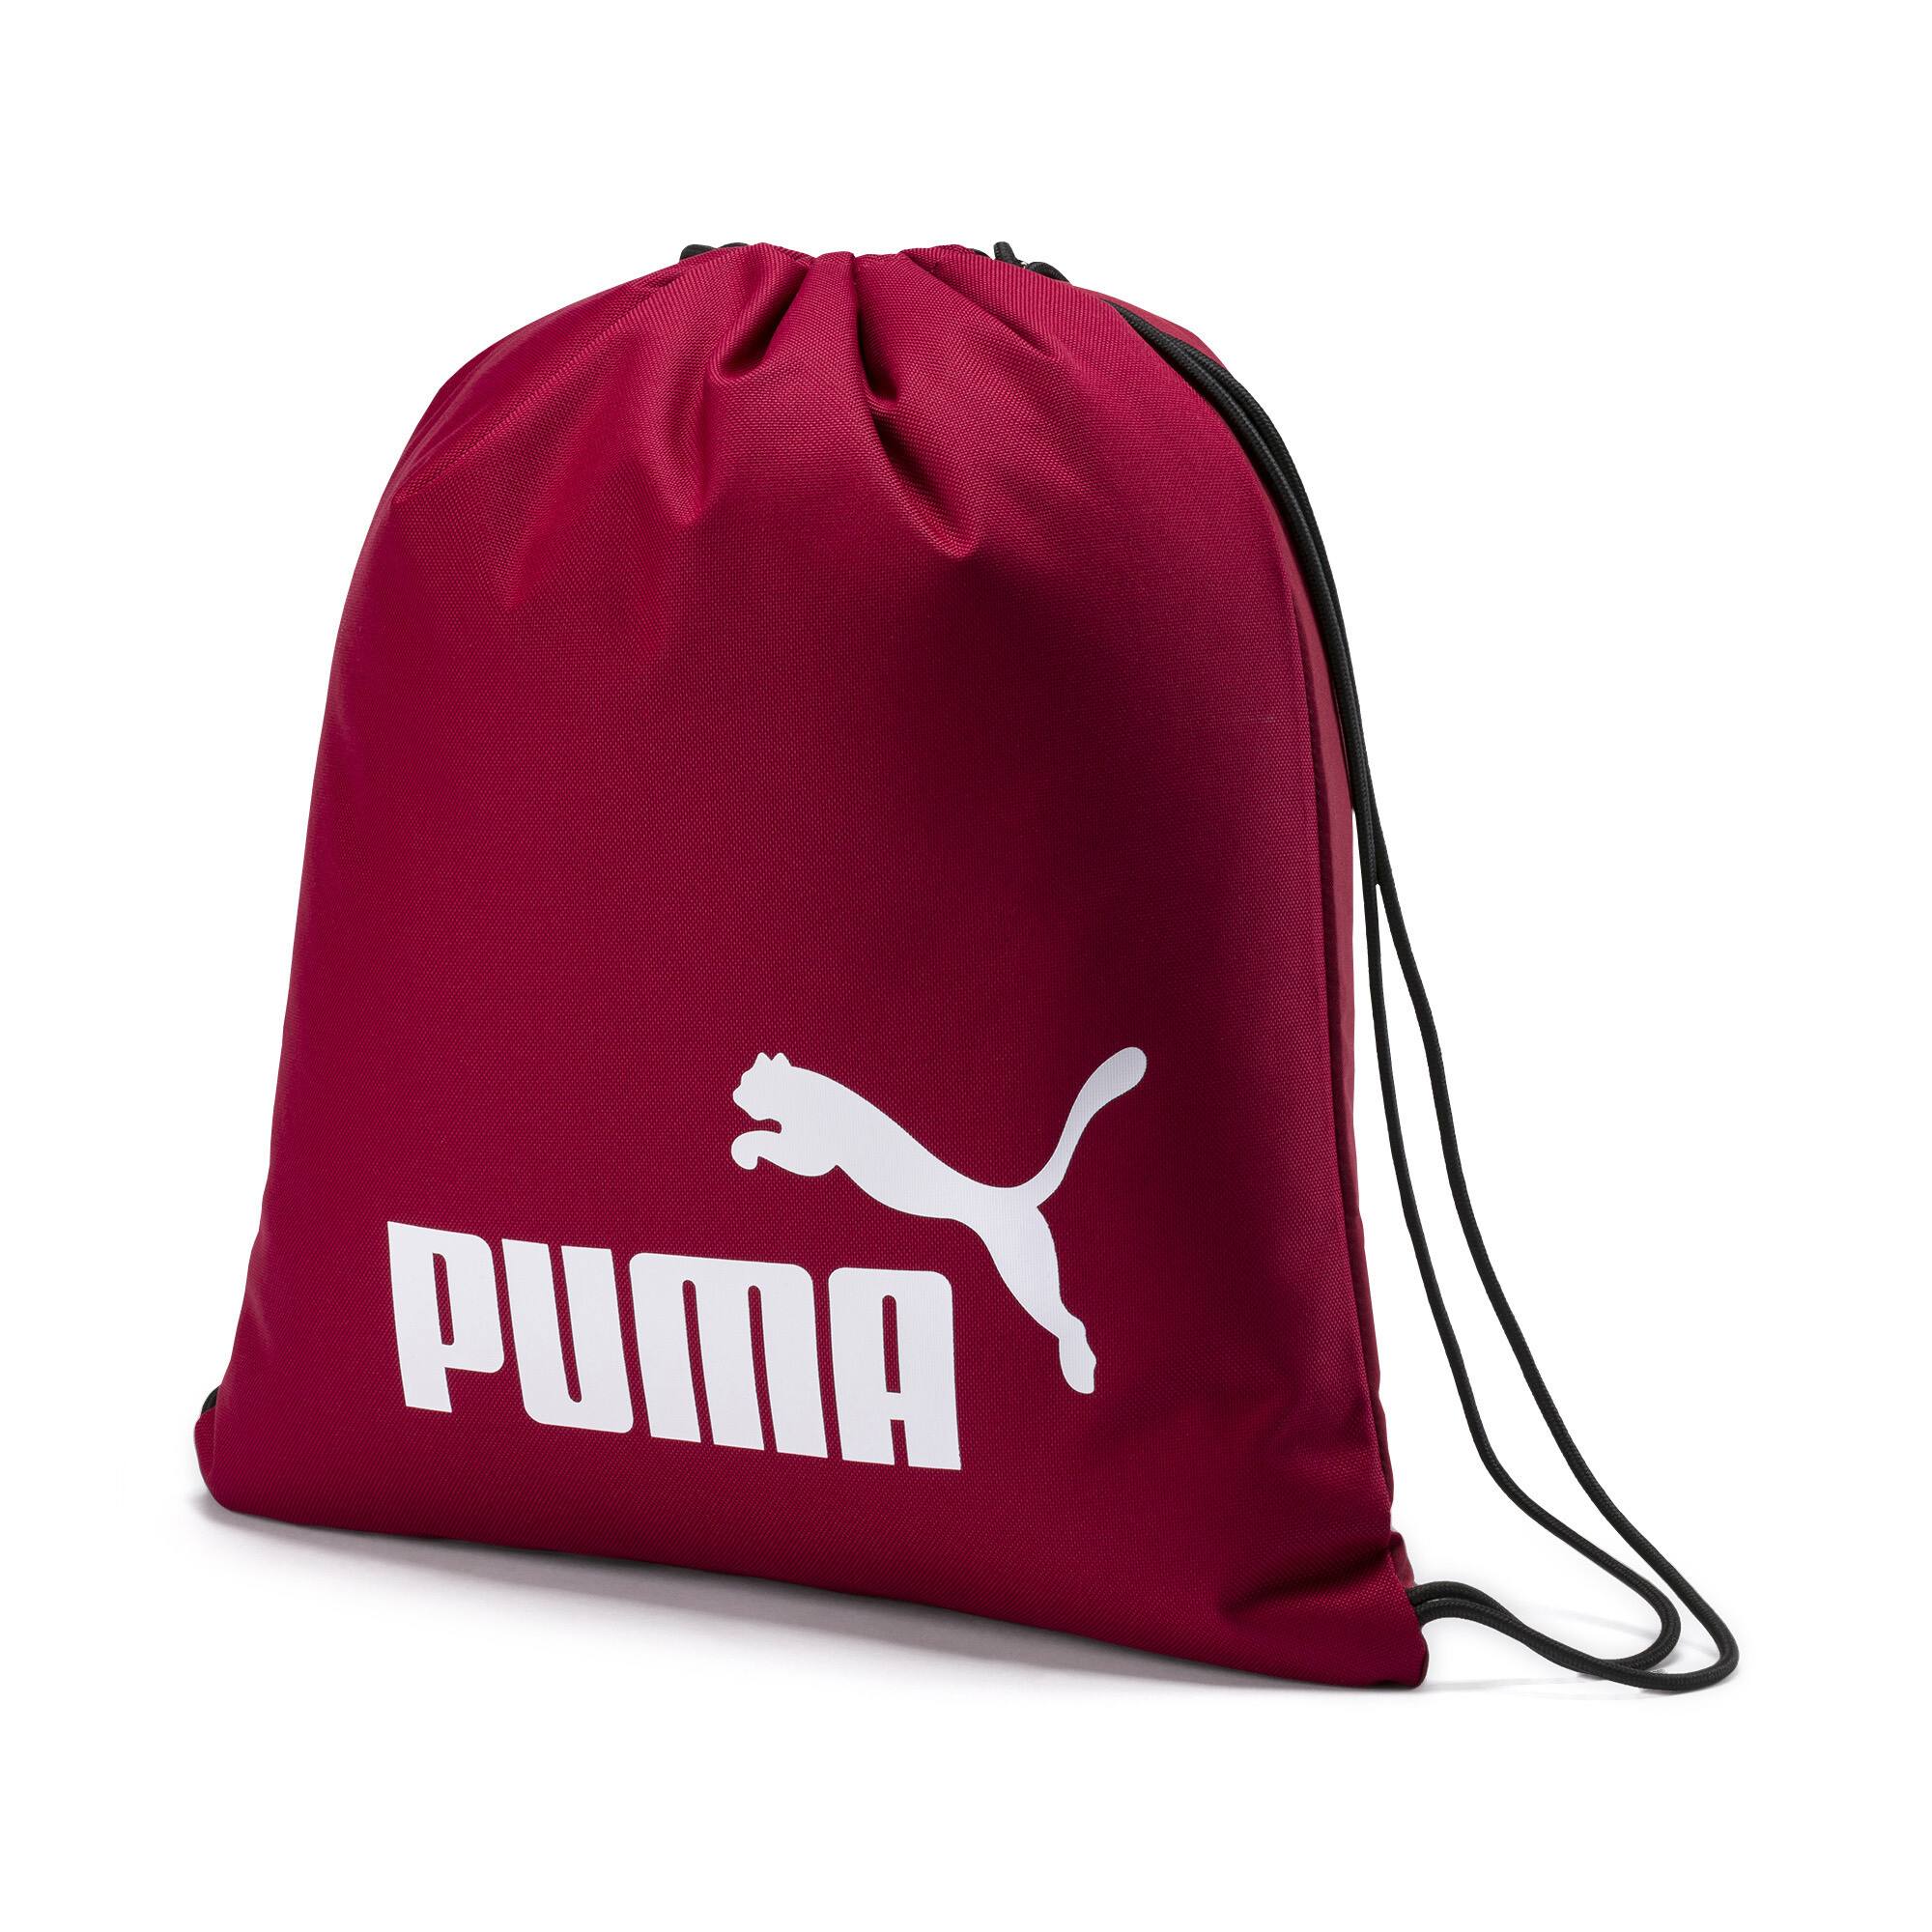 Men's Puma Phase Gym Bag, Red, Accessories